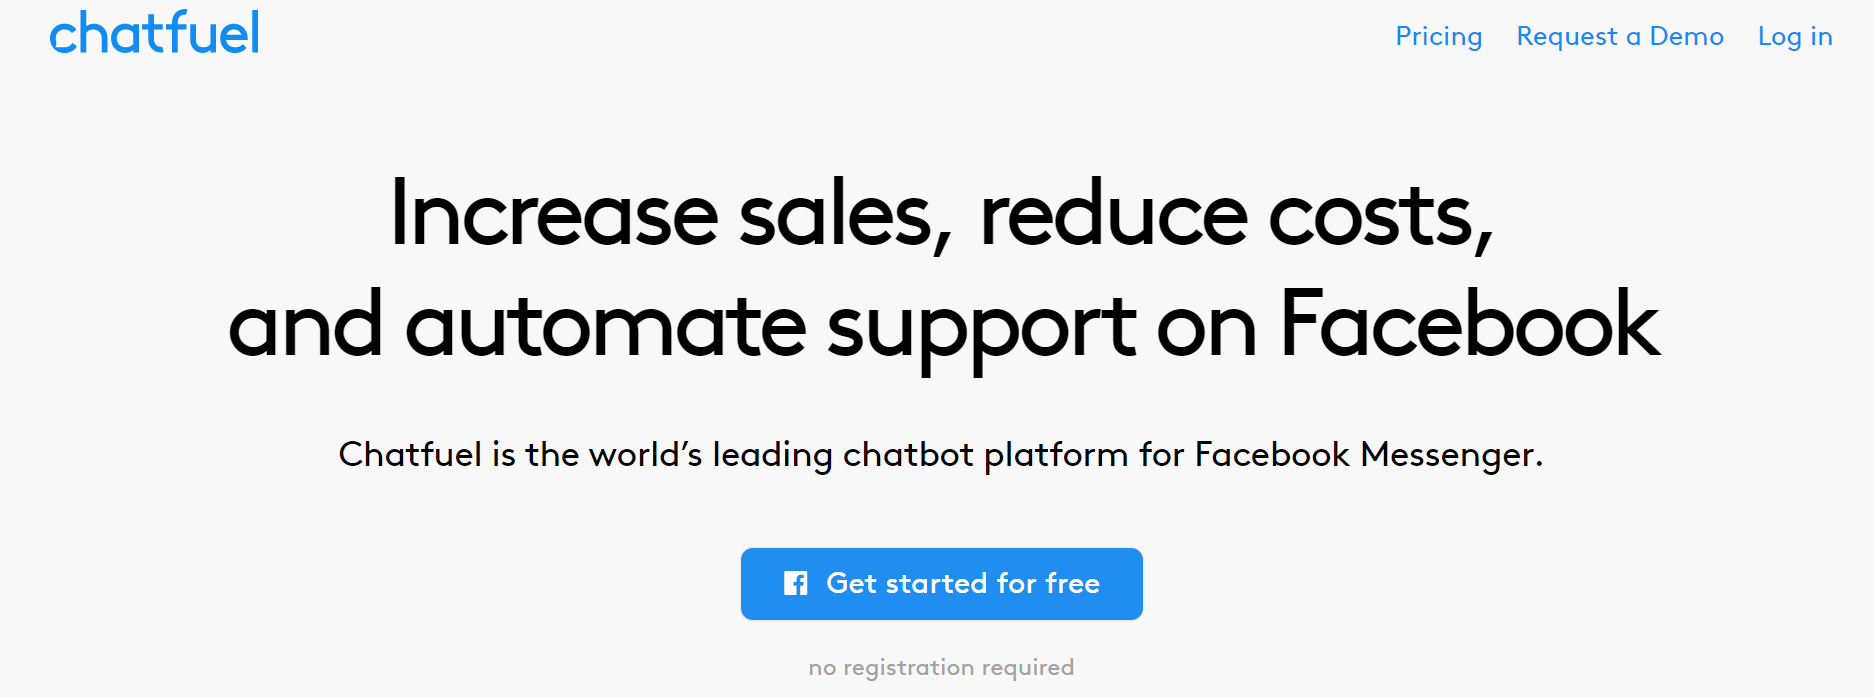 best chatbots for marketing - Chatfuel